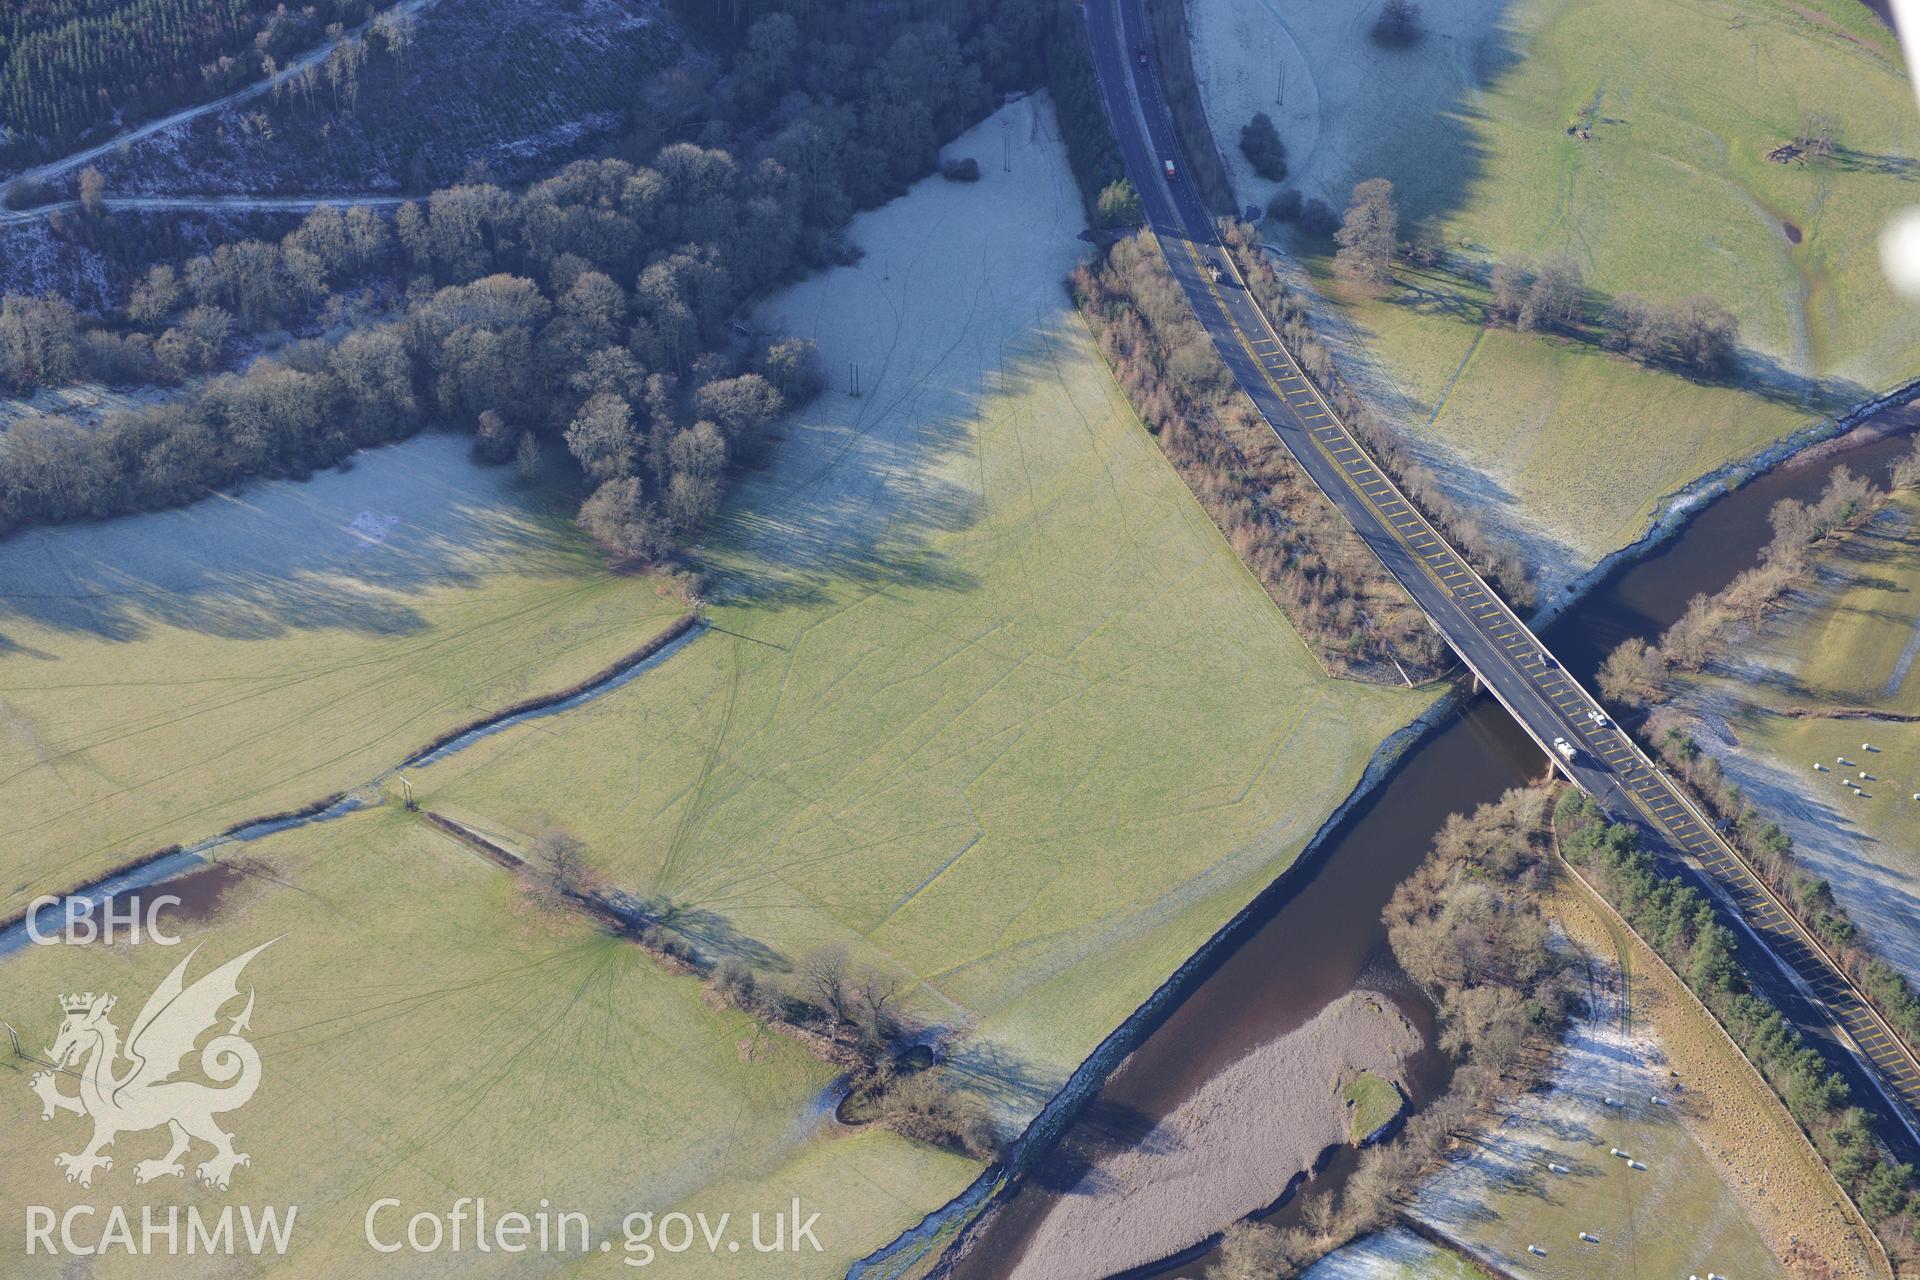 Water meadows north east of Closcoed and the bridge taking the A40 Brecon bypass over the river Usk, on the southern edge of Brecon. Oblique aerial photograph taken during the Royal Commission?s programme of archaeological aerial reconnaissance by Toby Driver on 15th June 2013.